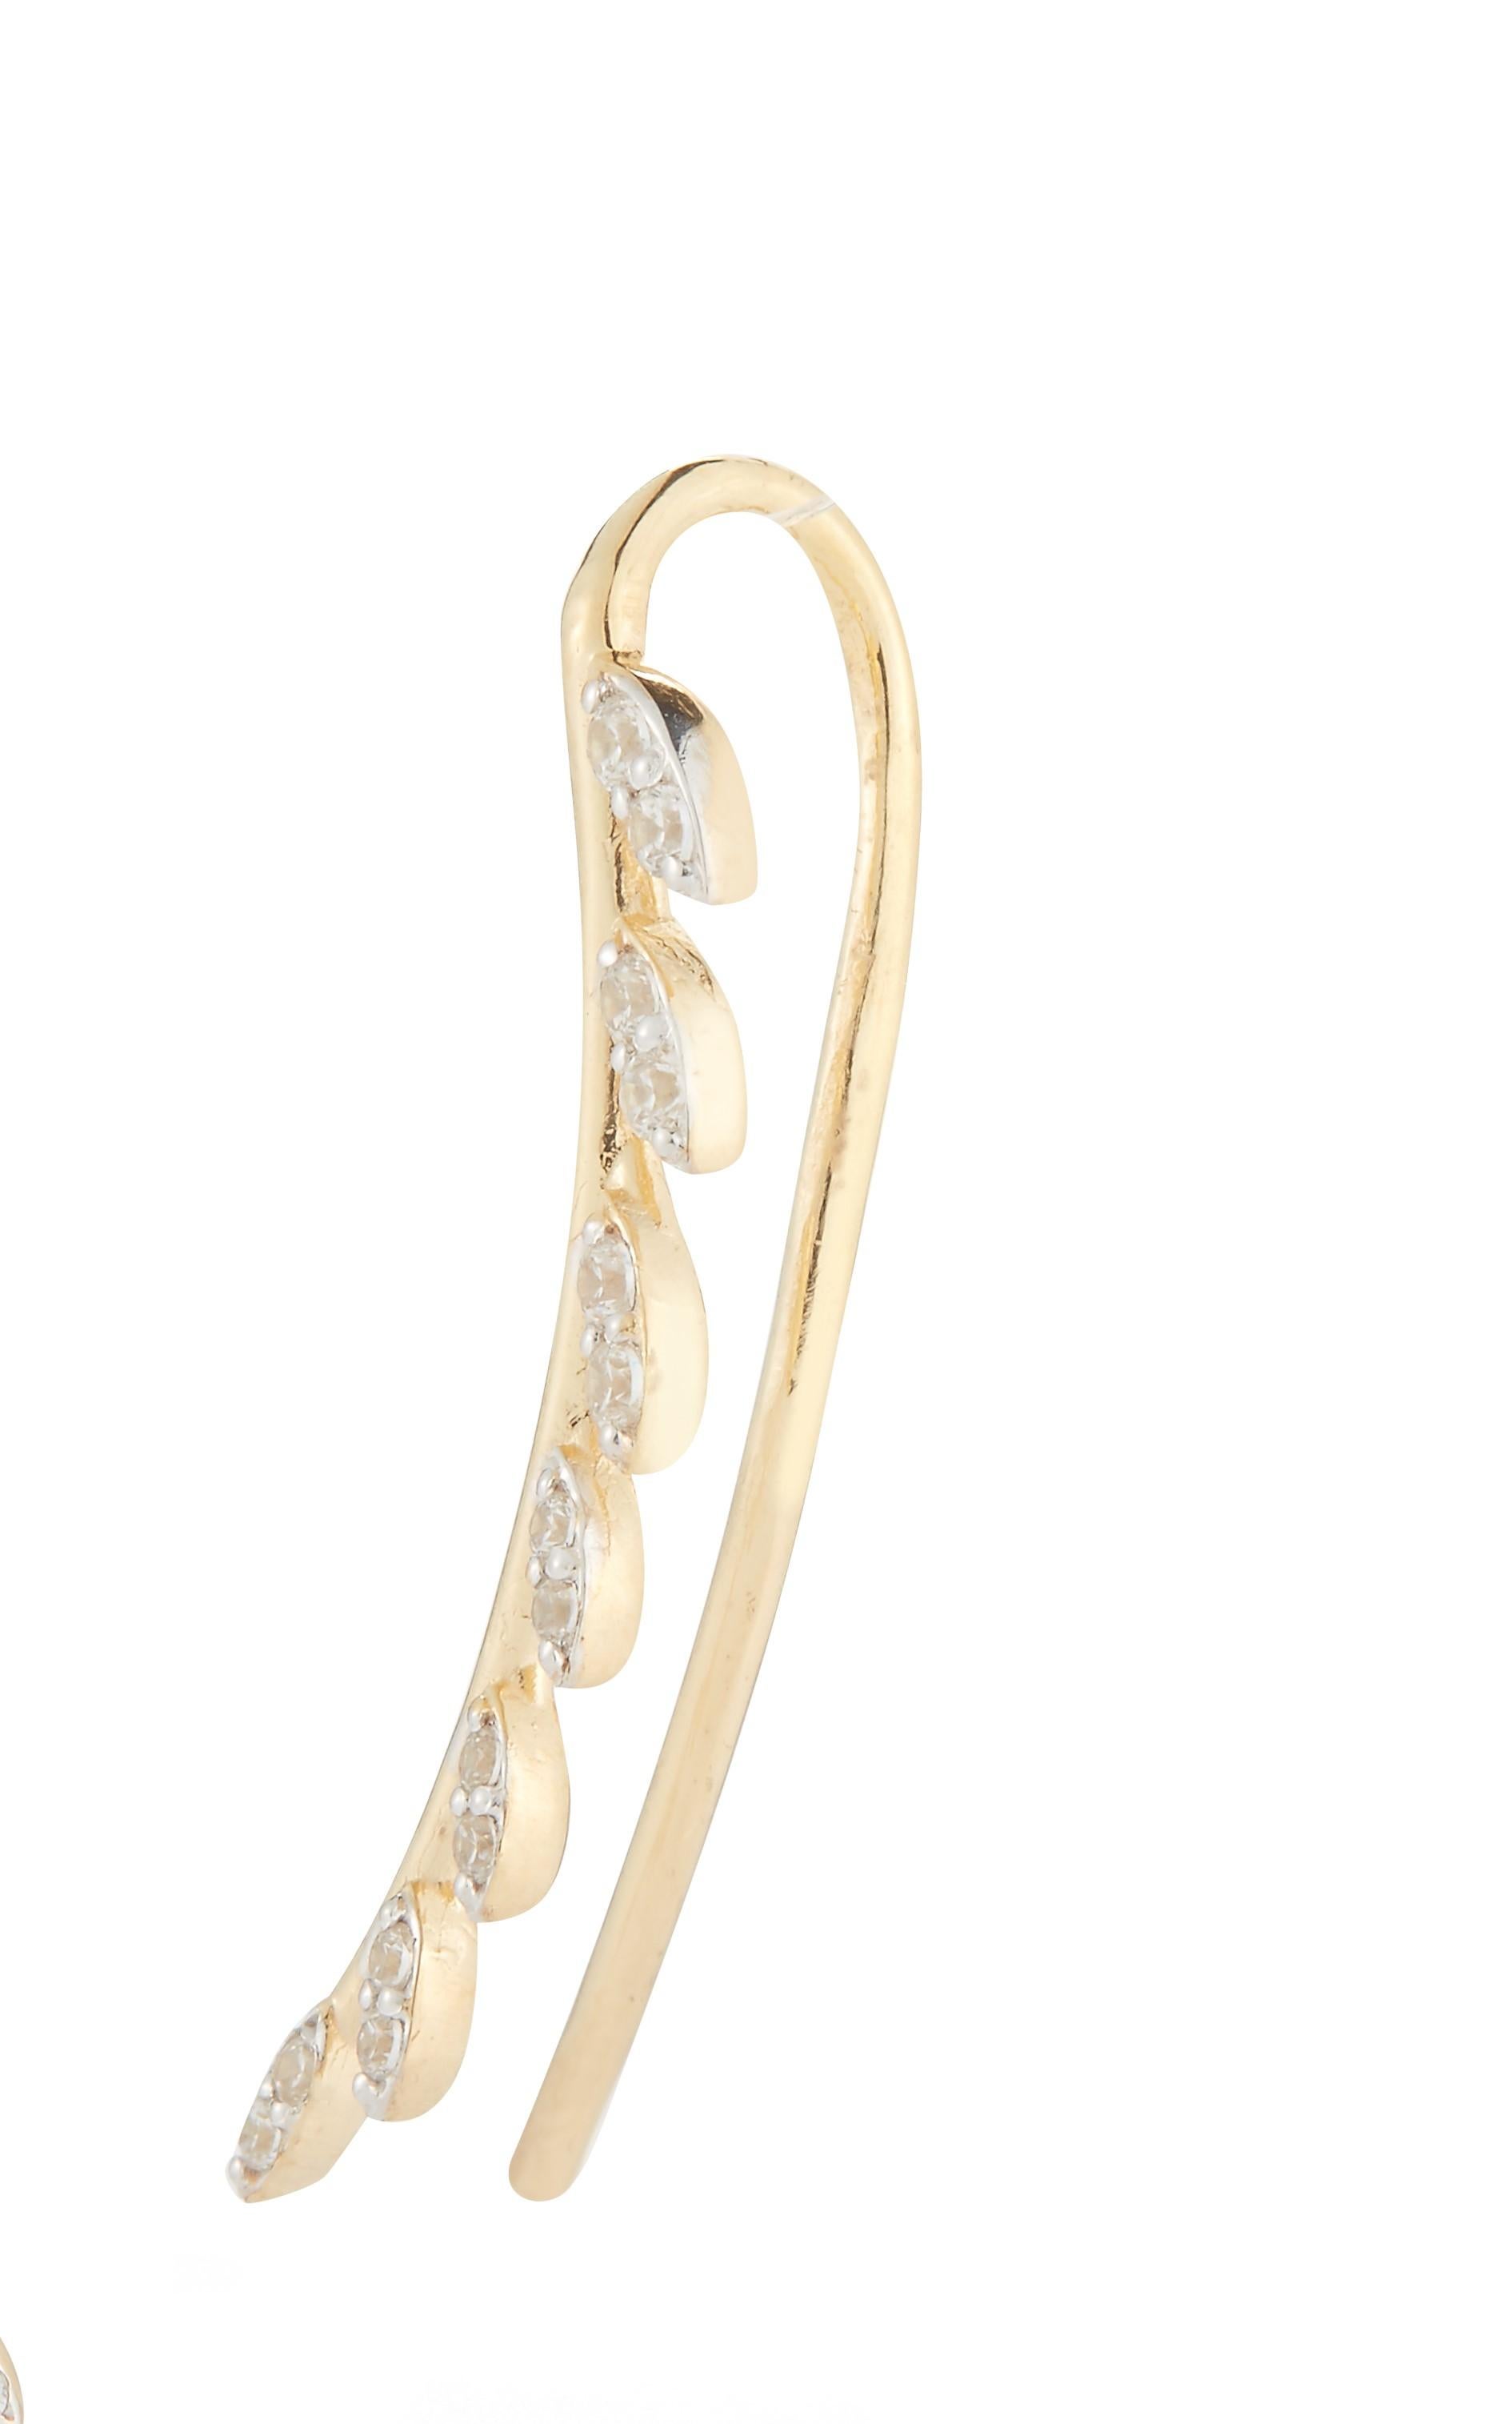 14 Karat Yellow Gold Hand-Crafted Polish-Finished Leaf Climber Earrings, Accented with 0.15 Carats of Pave Set Diamond Leaves.
